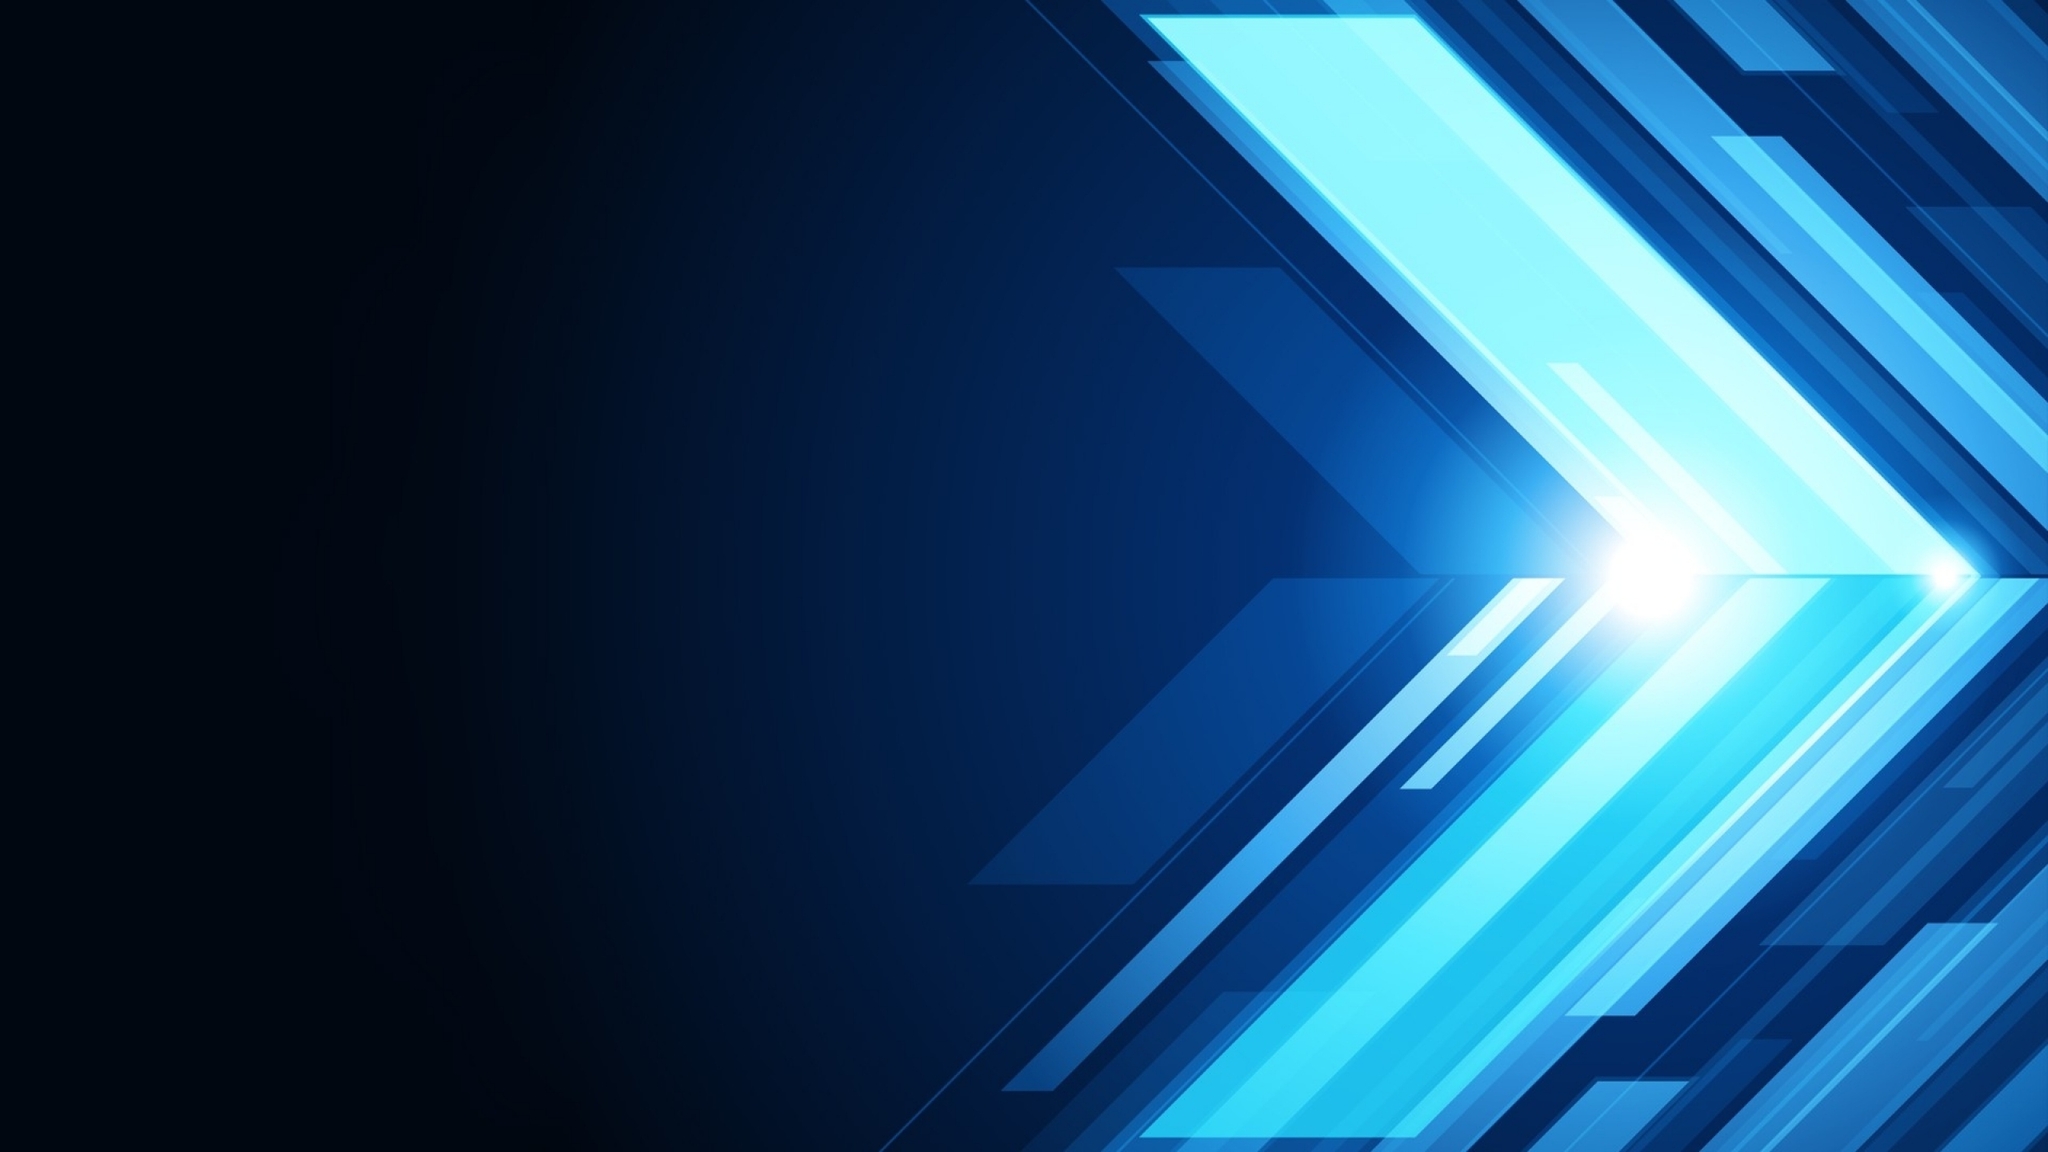 48x1152 Blue Abstract Hd 48x1152 Resolution Hd 4k Wallpapers Images Backgrounds Photos And Pictures